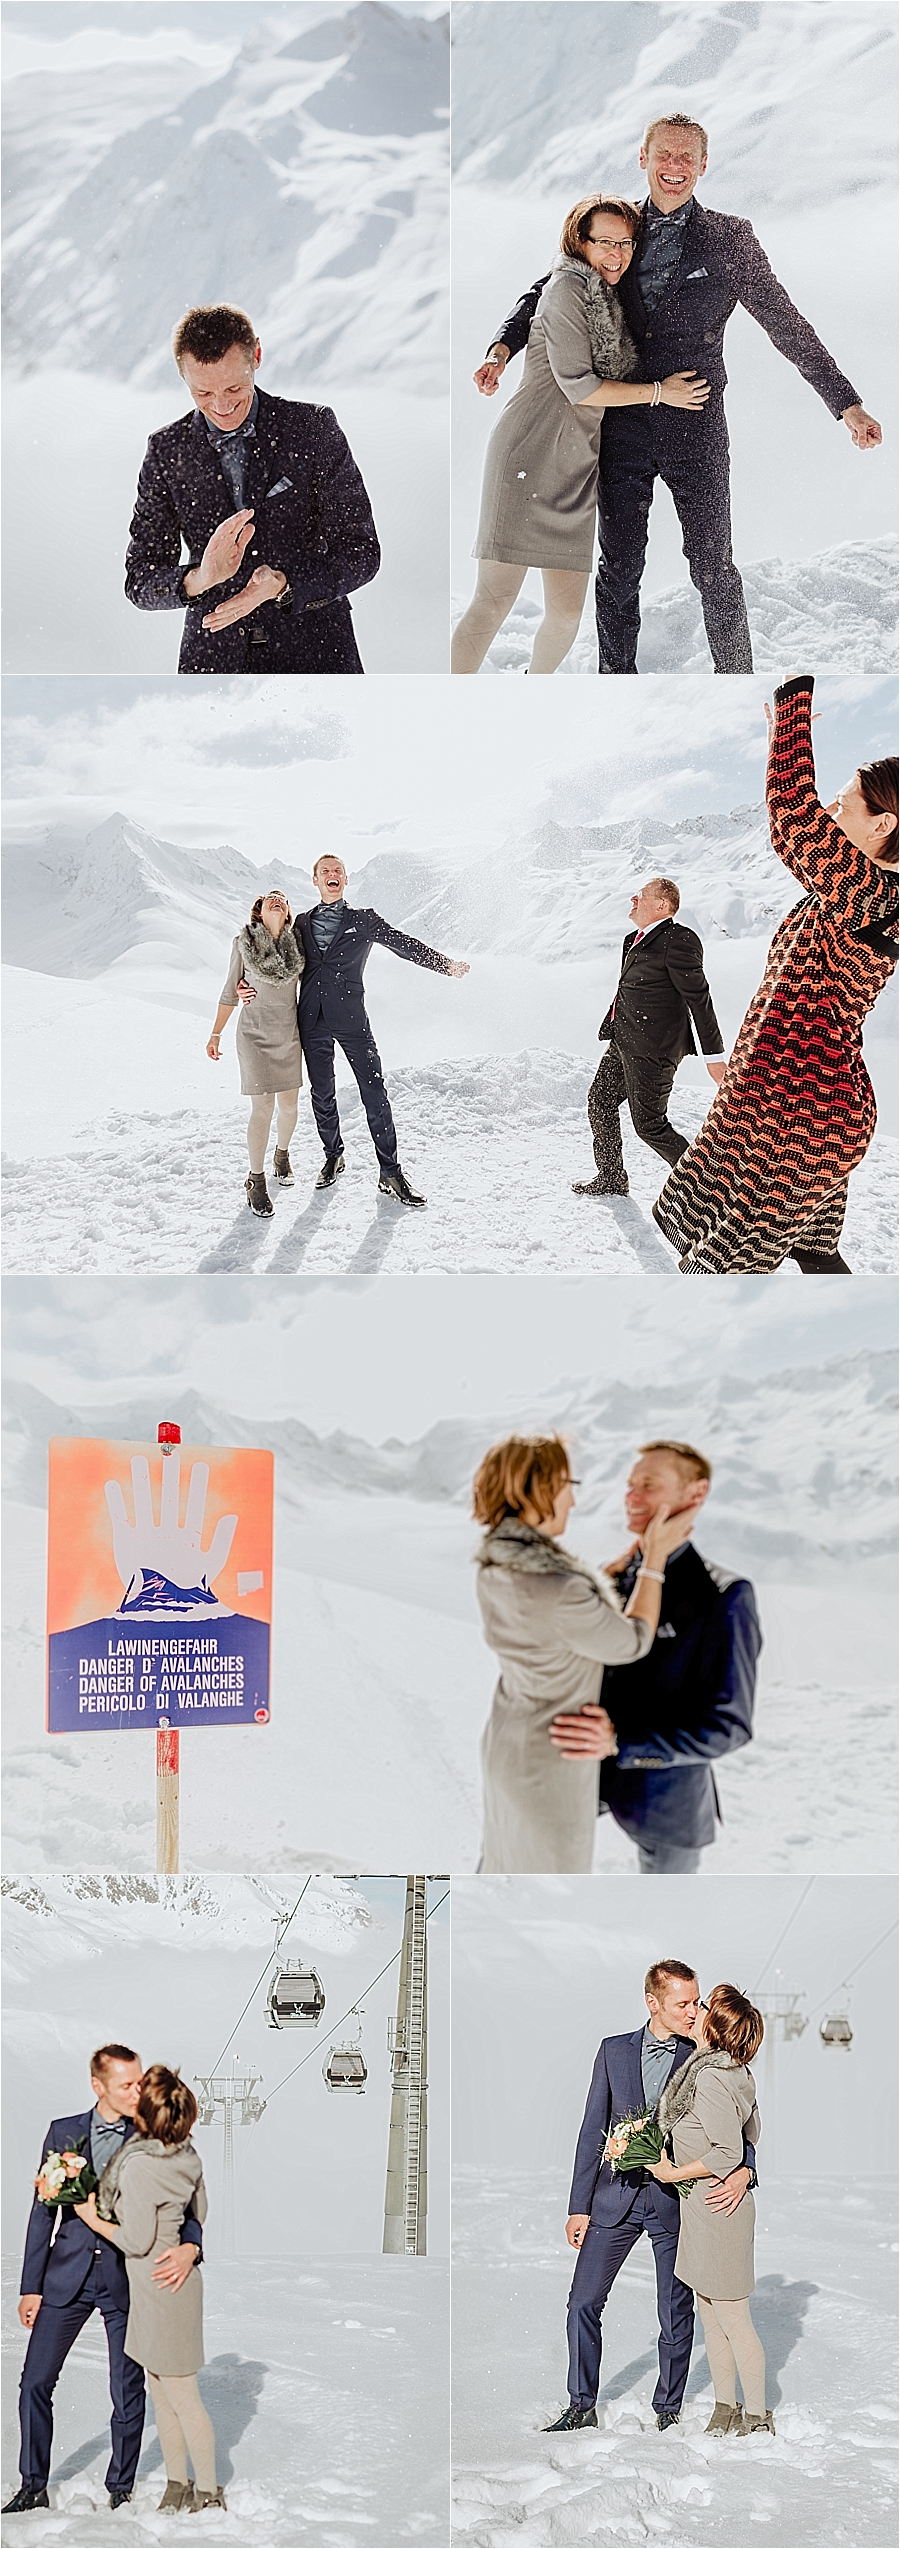 The bride & groom celebrate by throwing snow after their winter wedding in Austria by Wild Connections Photography